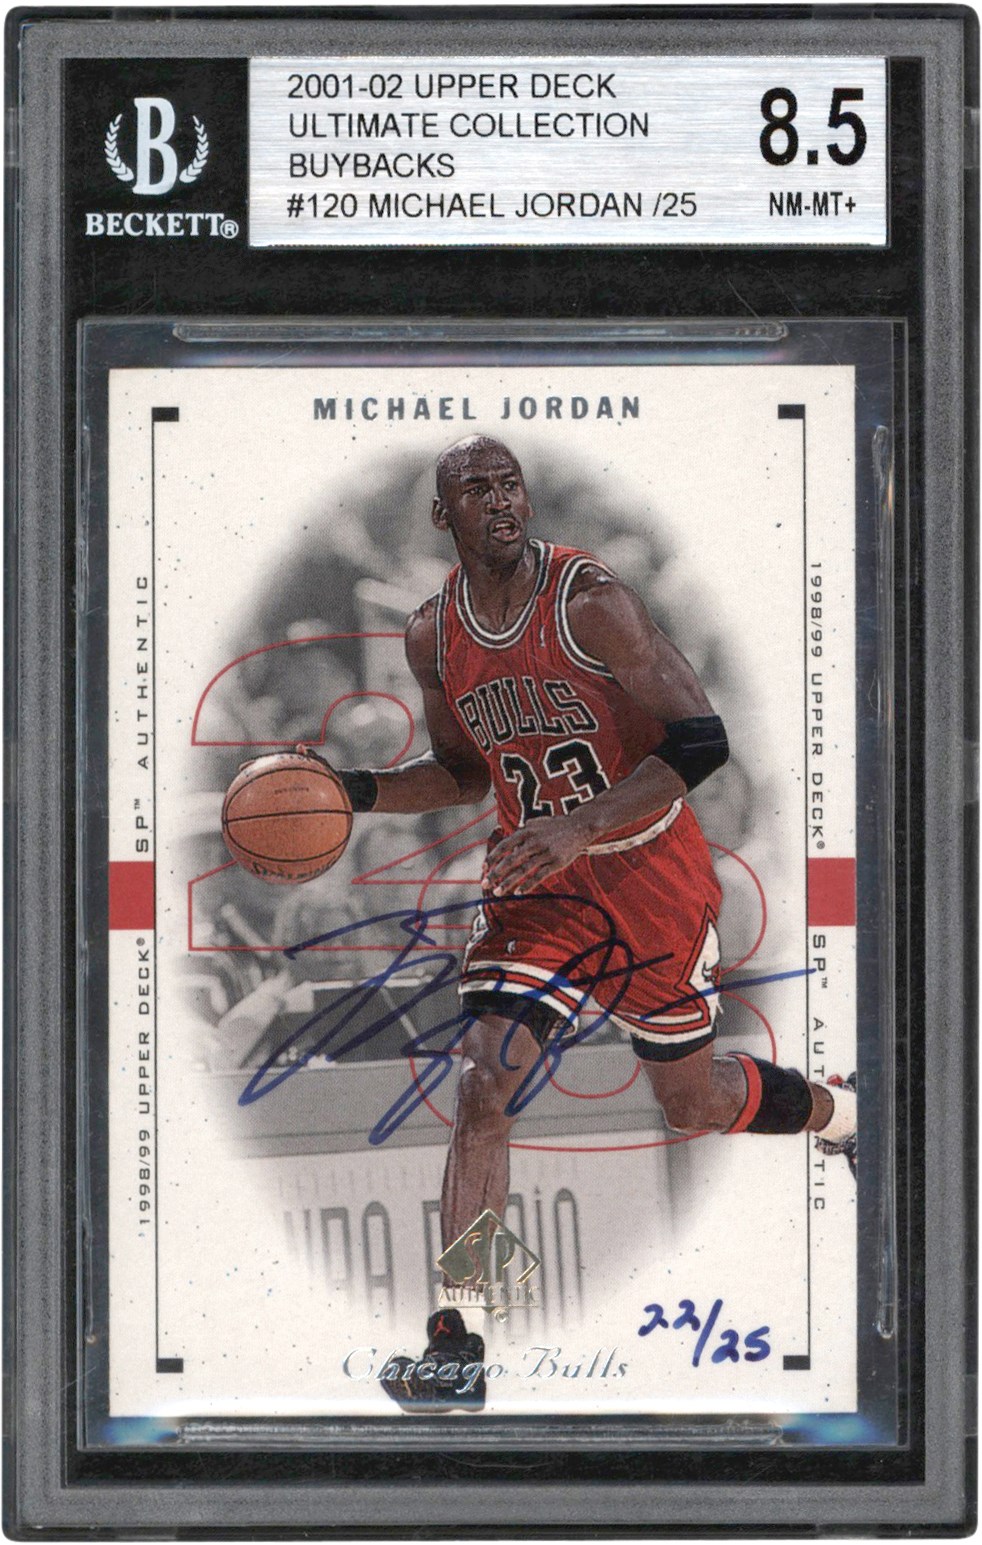 Basketball Cards - 2001-2002 Upper Deck Ultimate Collection Basketball Buybacks #120 Michael Jordan Autograph Card #22/25 BGS NM-MT+ 8.5 Auto 10